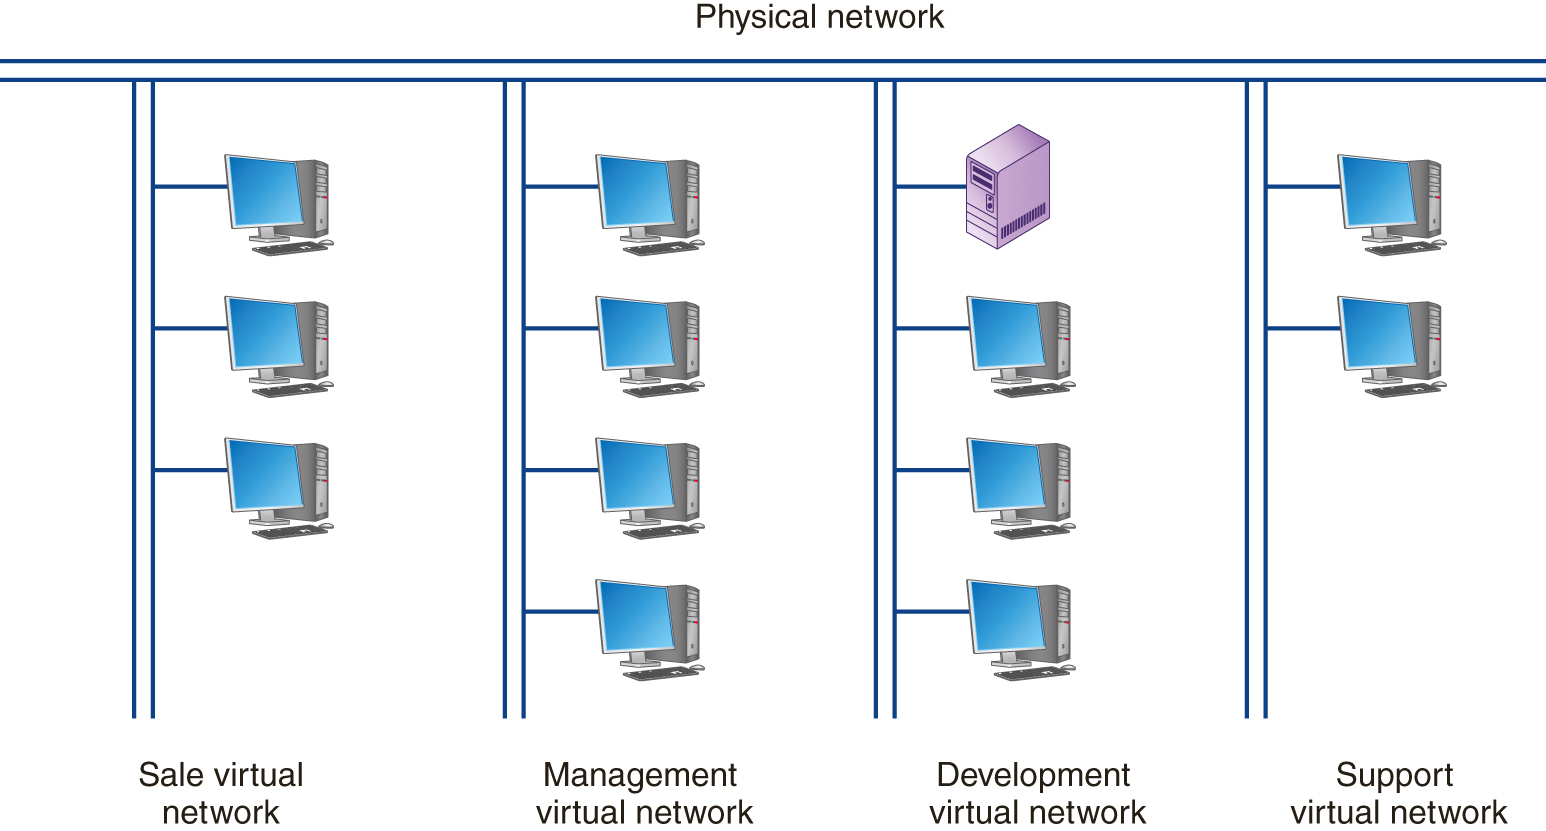 An illustration shows sales virtual network, management virtual network, development virtual network, and support virtual network all connected to a physical network.
